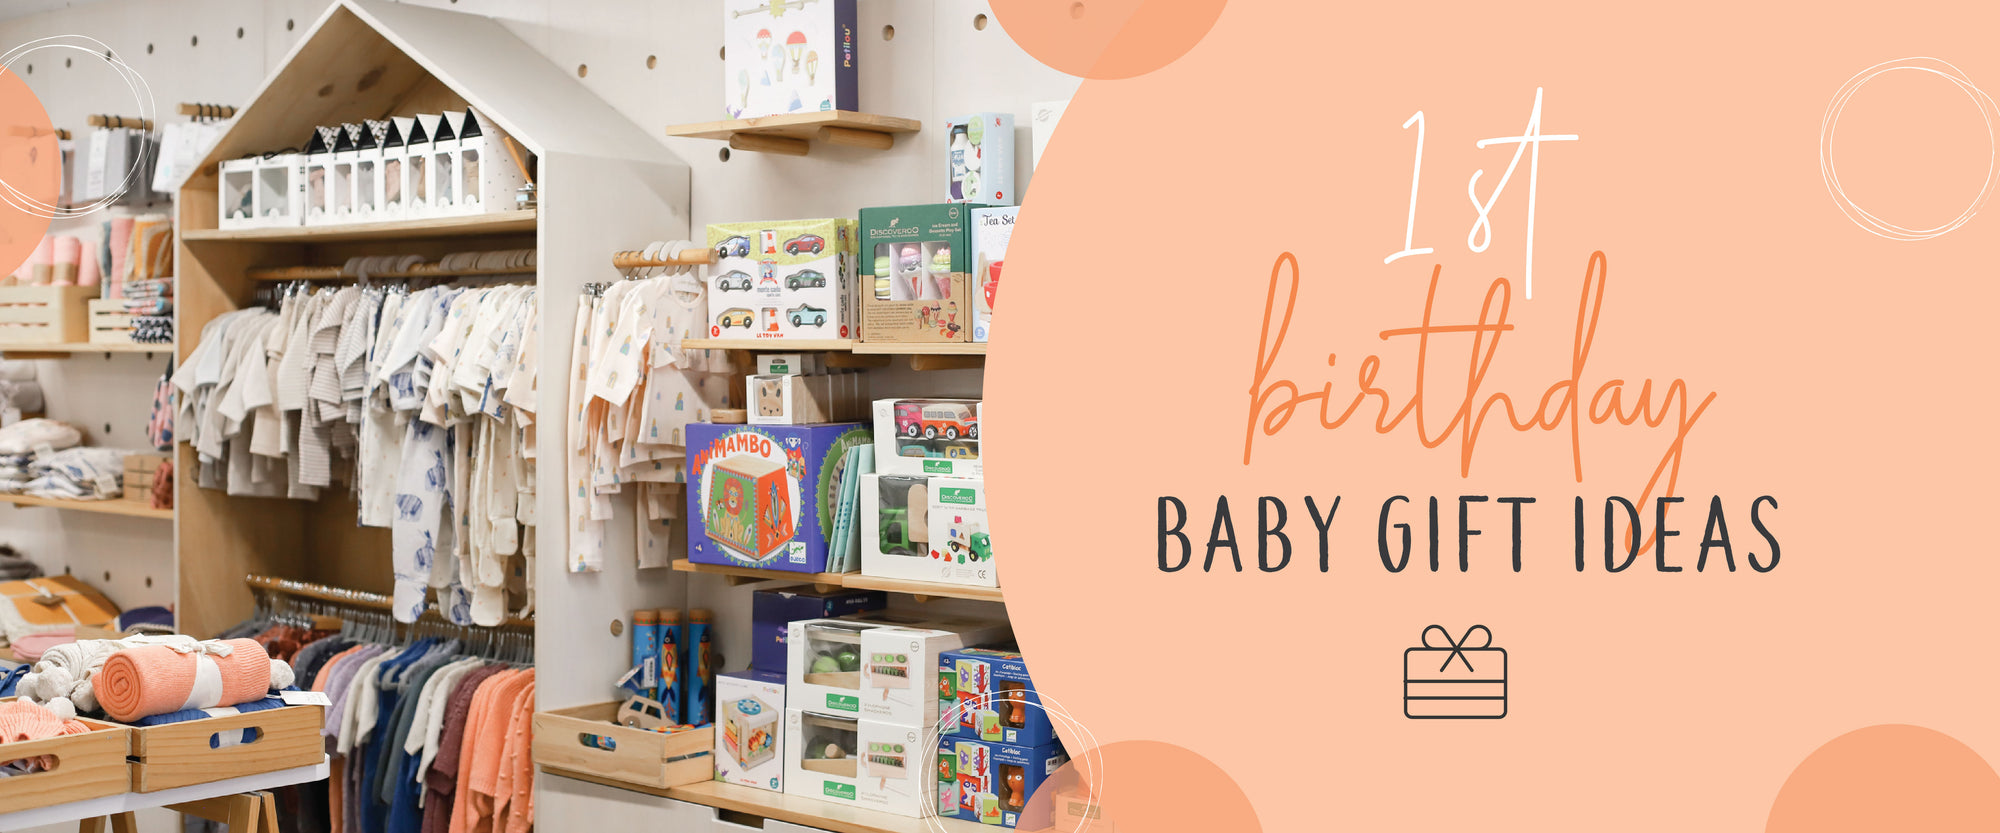 First Birthday Baby Gift Ideas-Global Baby